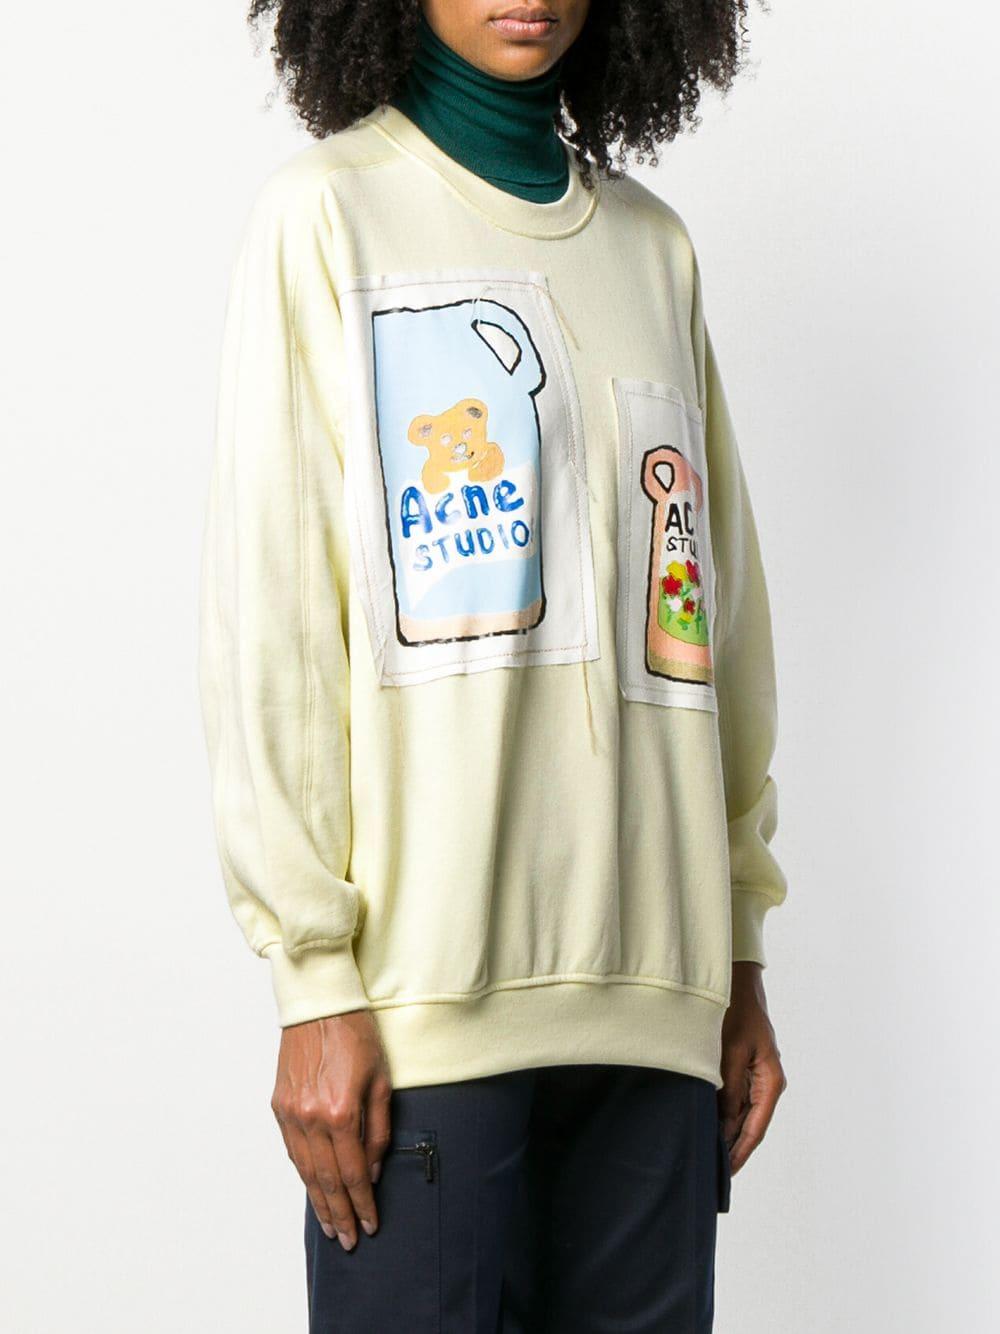 Acne Studios Grant Levy Lucero Stitched Patches Sweatshirt in Yellow | Lyst